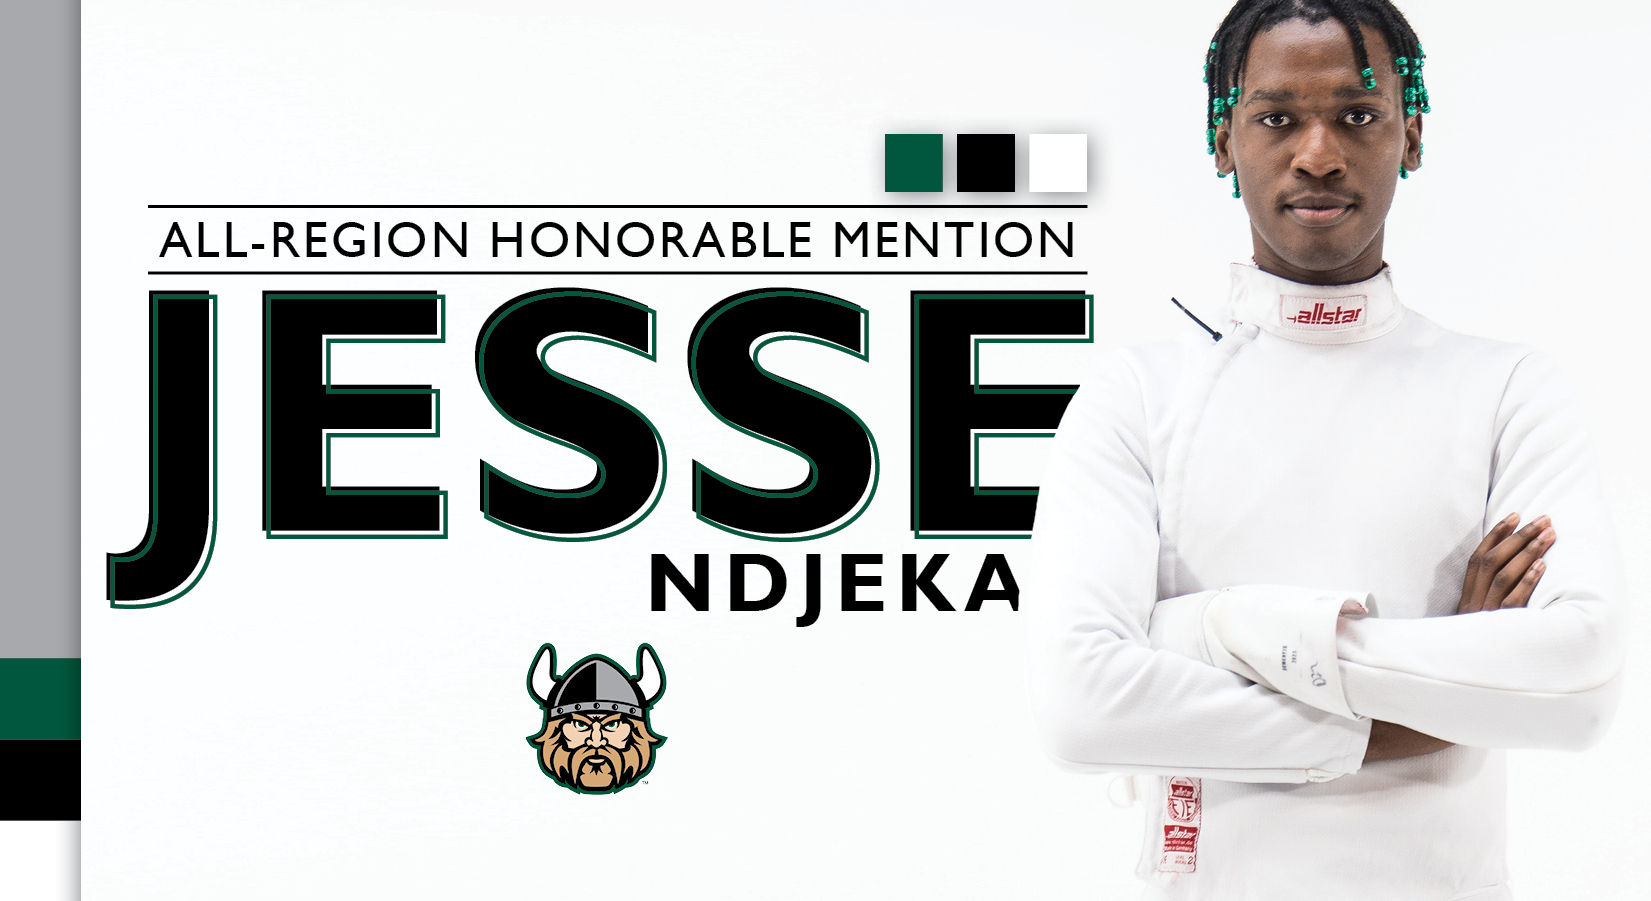 Jesse Ndjeka Named Midwest All-Region Honorable Mention